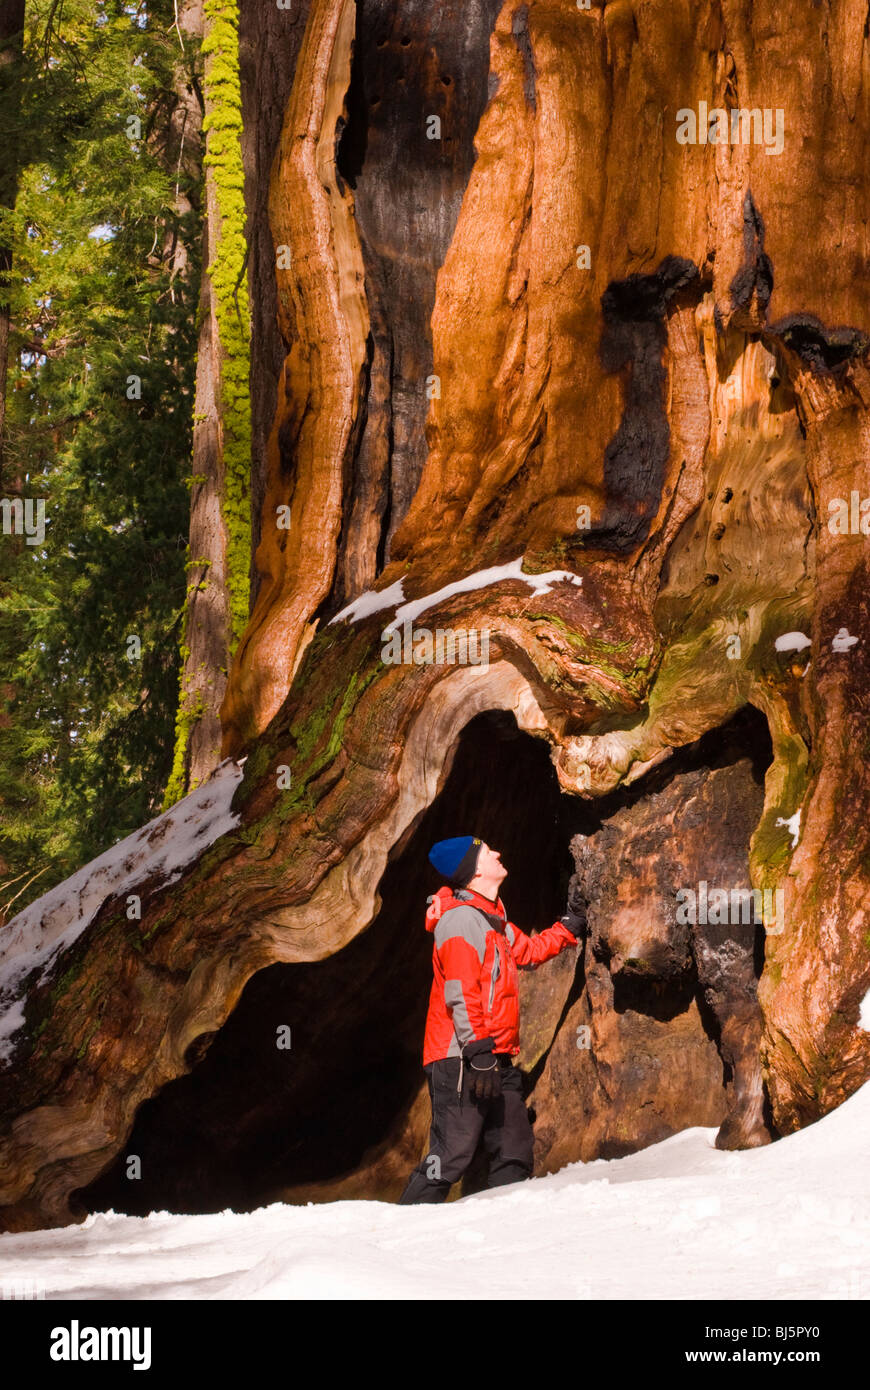 Backcountry skier and Giant Sequoia, Giant Forest, Sequoia National Park, California Stock Photo